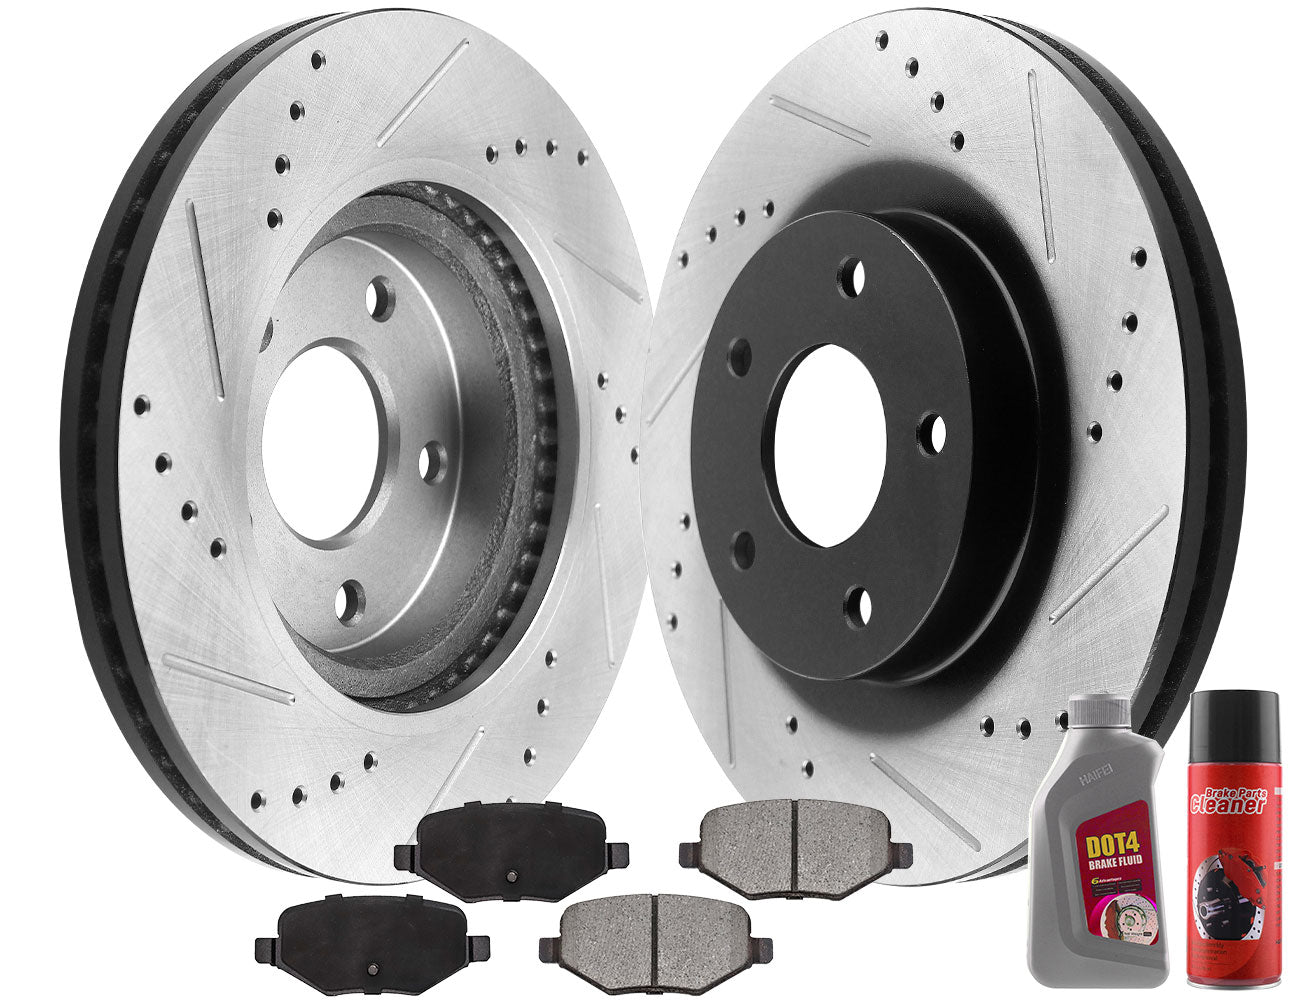 JADODE 330mm Rear Disc Rotors + Brake Pad for 2011 2012 2013 2014 Ford Edge Lincoln MKX